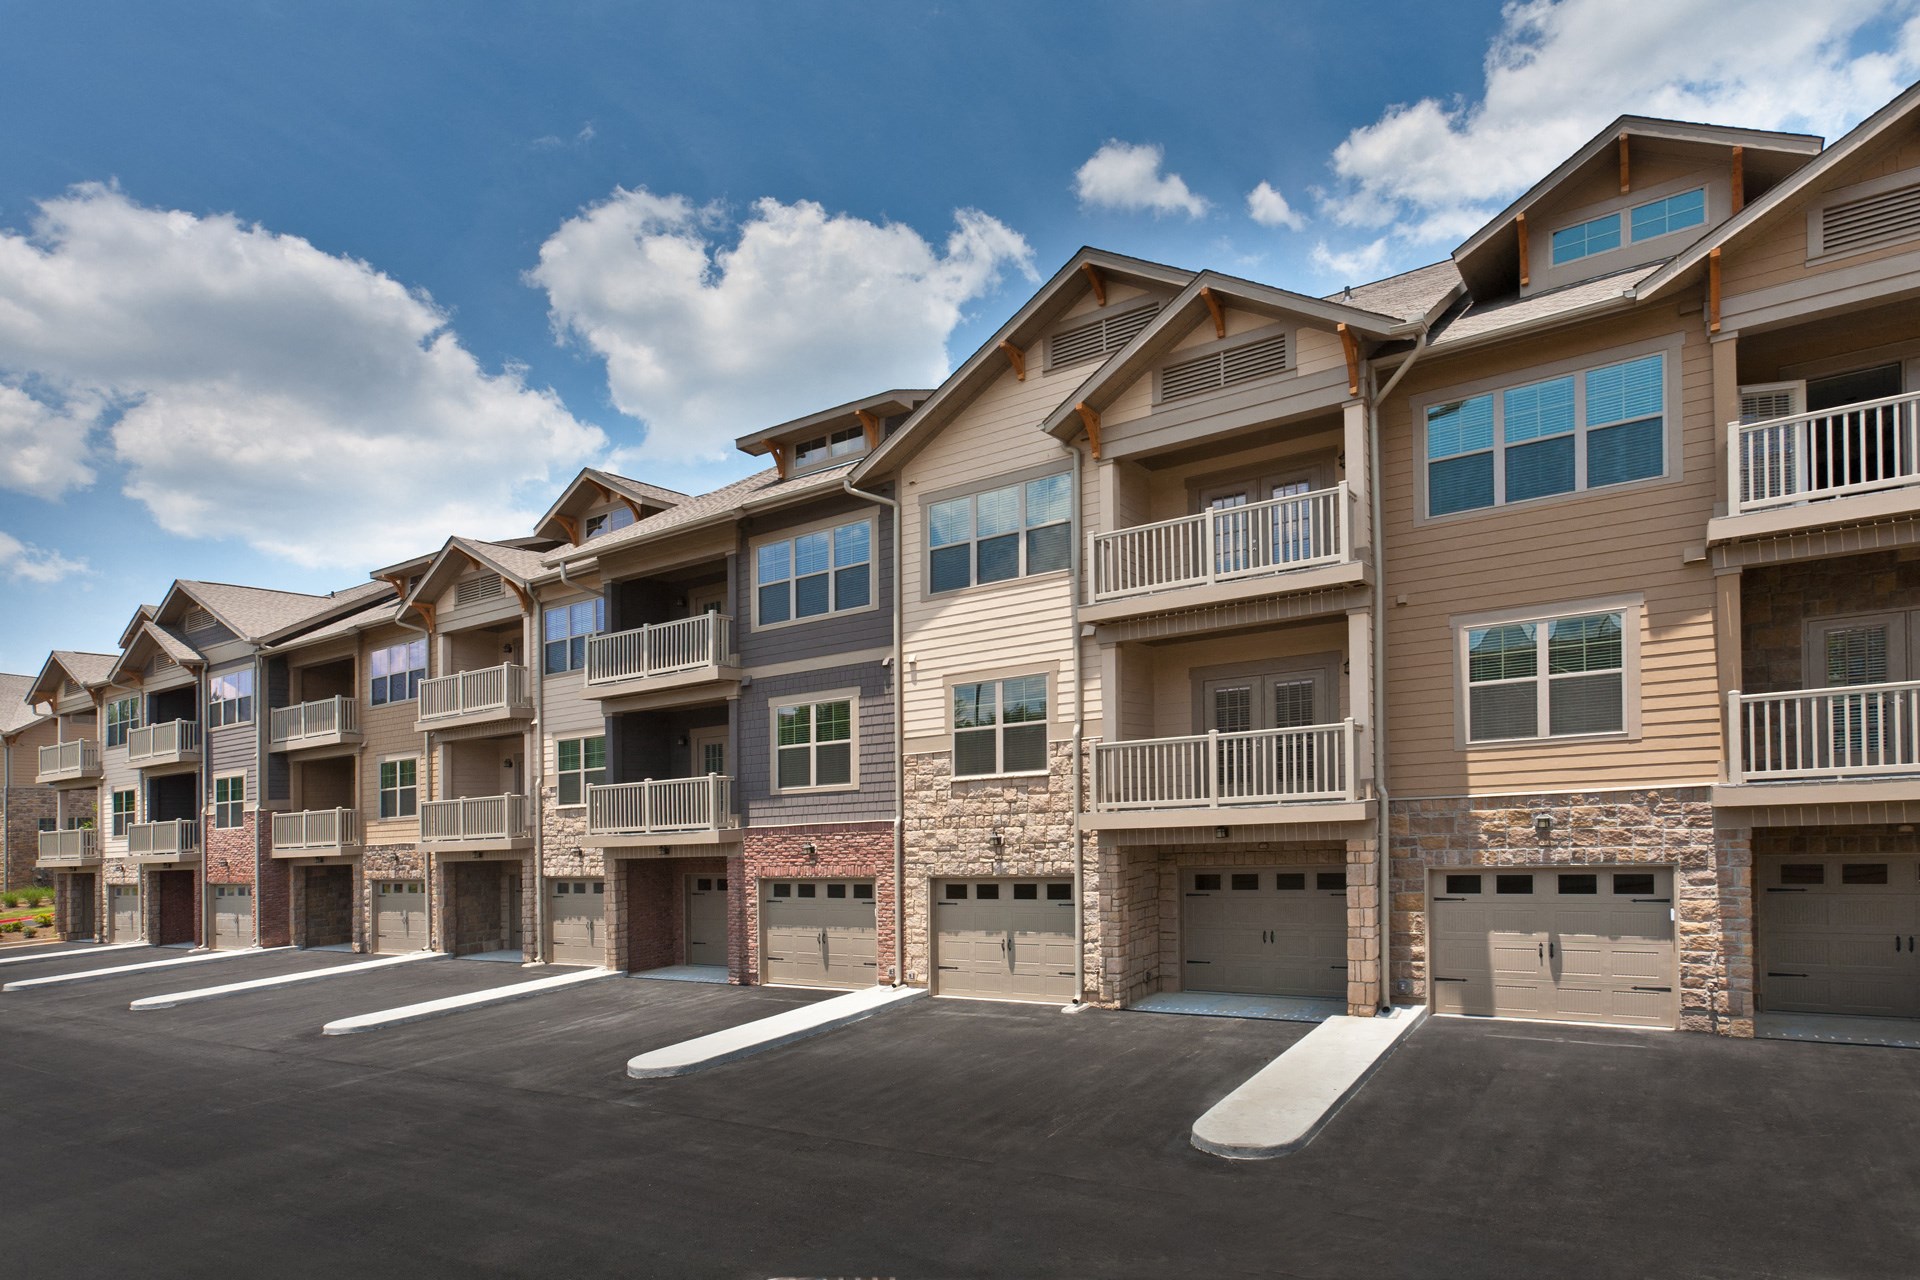 Exterior of The Regency townhomes with balconies and car garages attached.